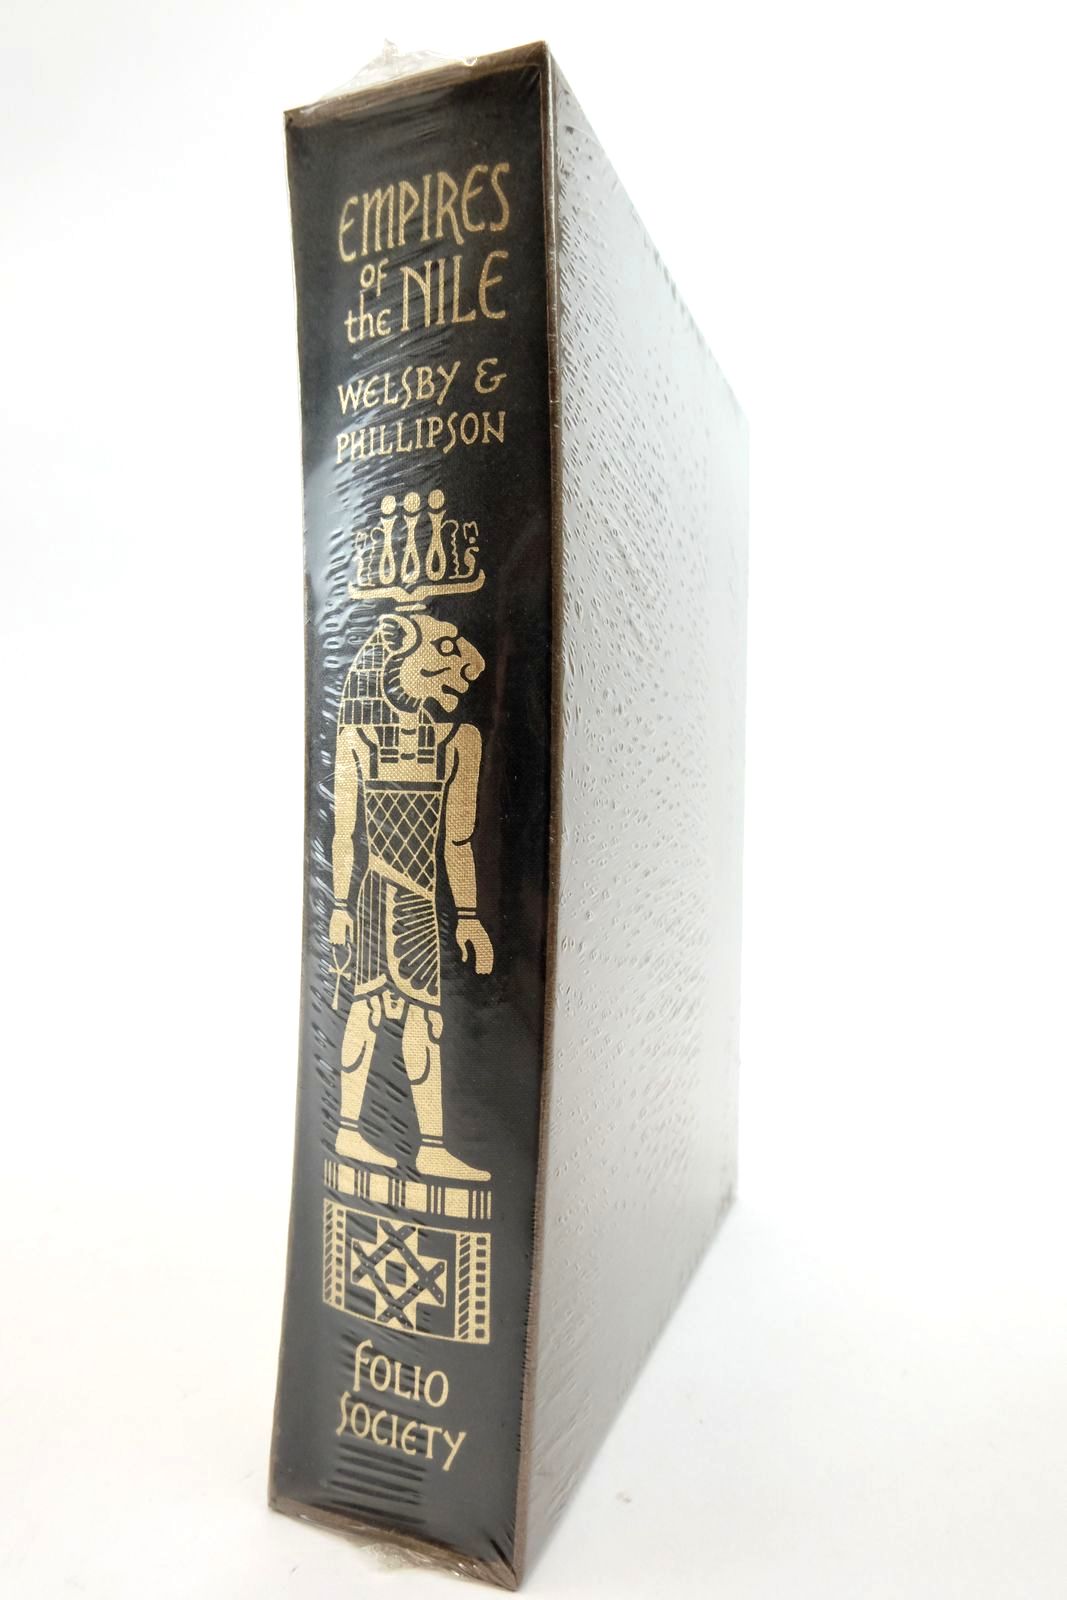 Photo of EMPIRES OF THE NILE written by Welsby, Derek A. Phillipson, David W. published by Folio Society (STOCK CODE: 2136587)  for sale by Stella & Rose's Books